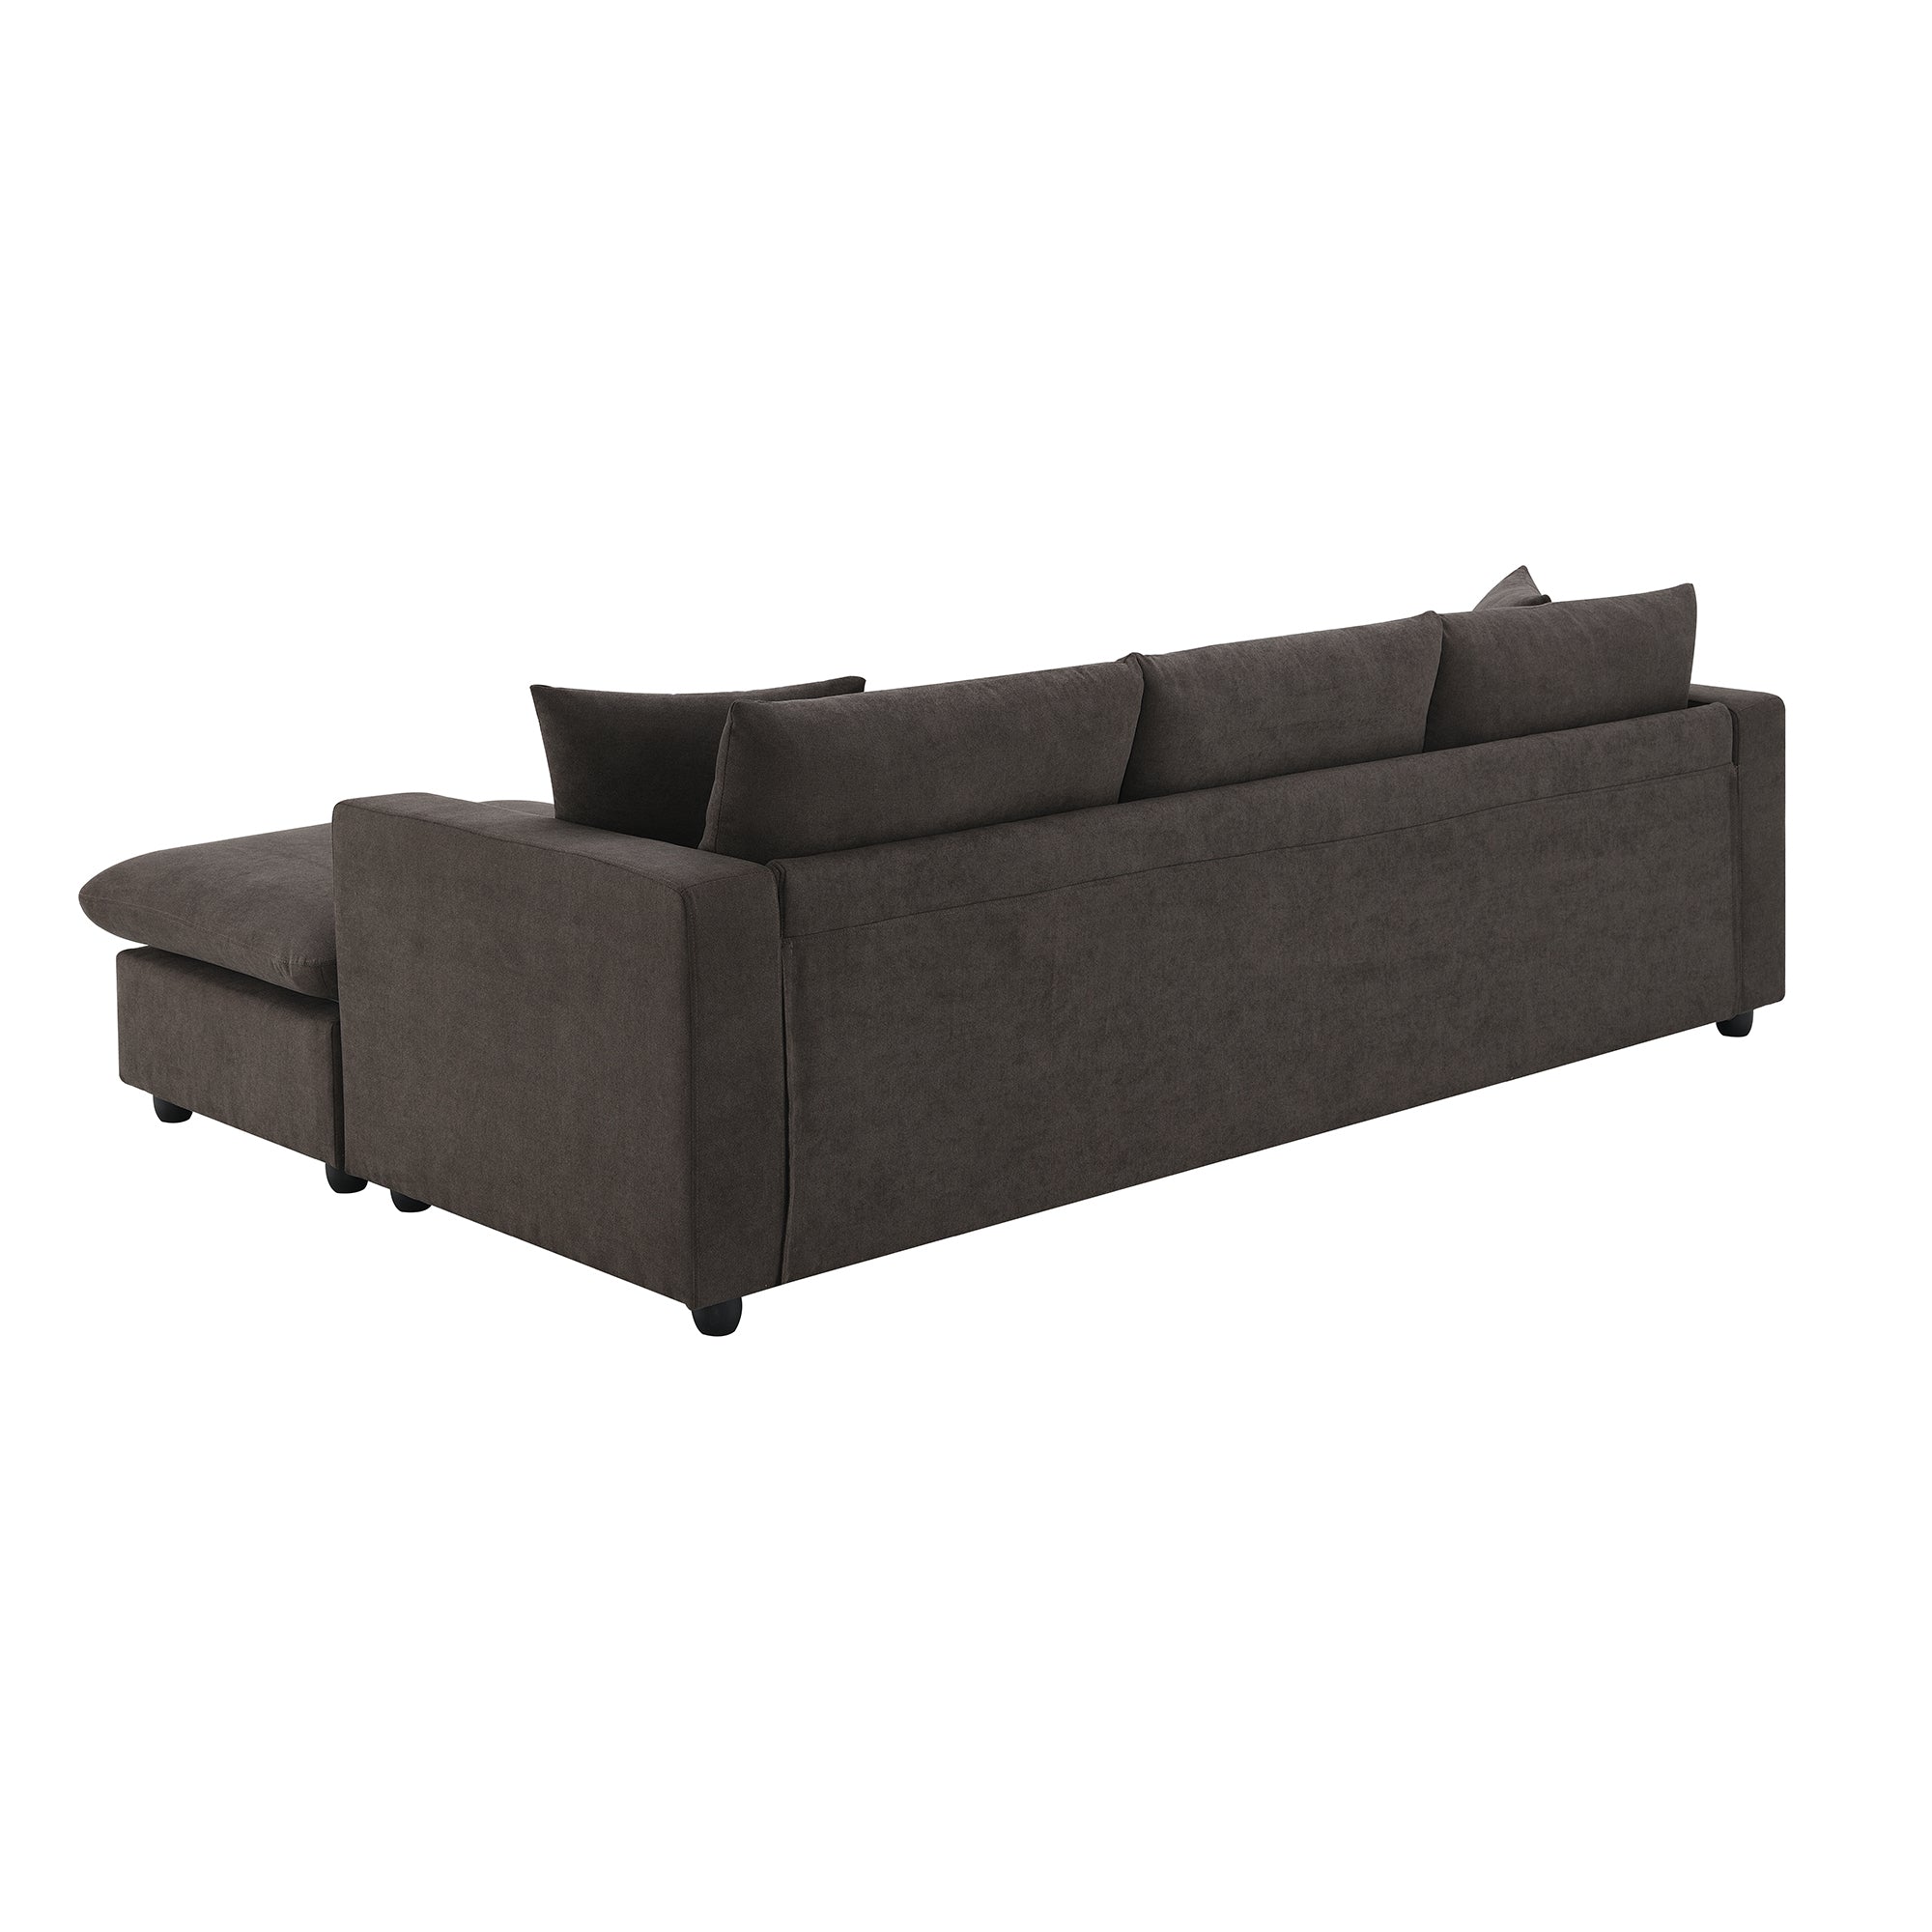 100.4x64.6" Modern Sectional Sofa, L-Shaped Couch Set With 2 Free Pillows, 4-Seat Polyester Fabric Couch Set With Convertible Ottoman - Dark Brown